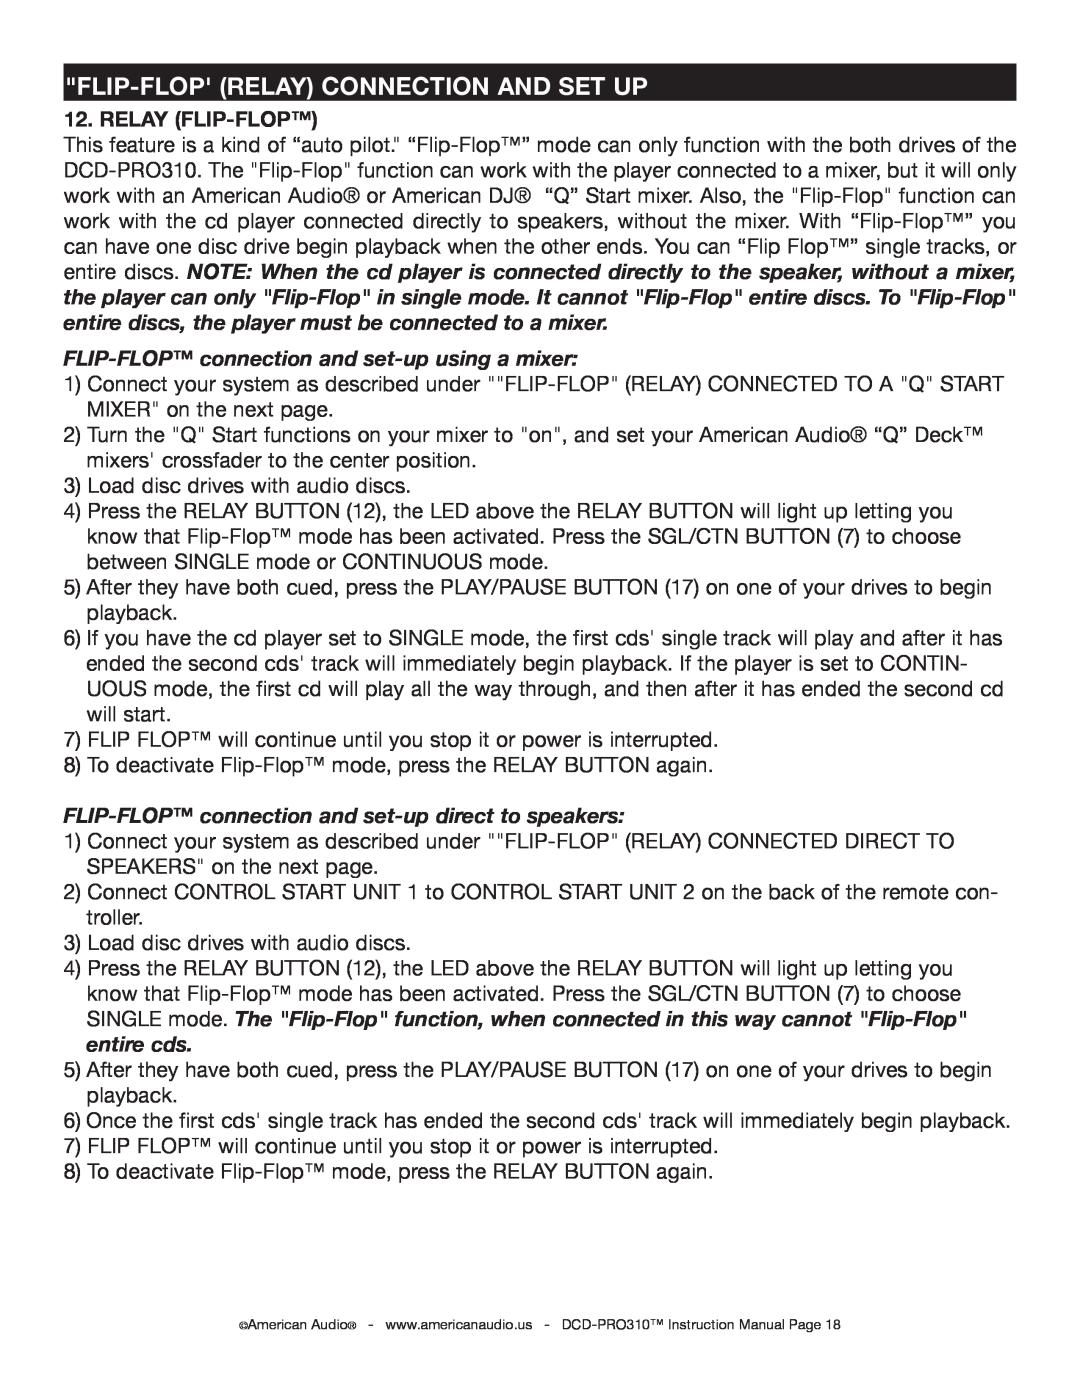 American Audio DCD-PRO310 operating instructions Flip-Floprelay Connection And Set Up, Relay Flip-Flop 